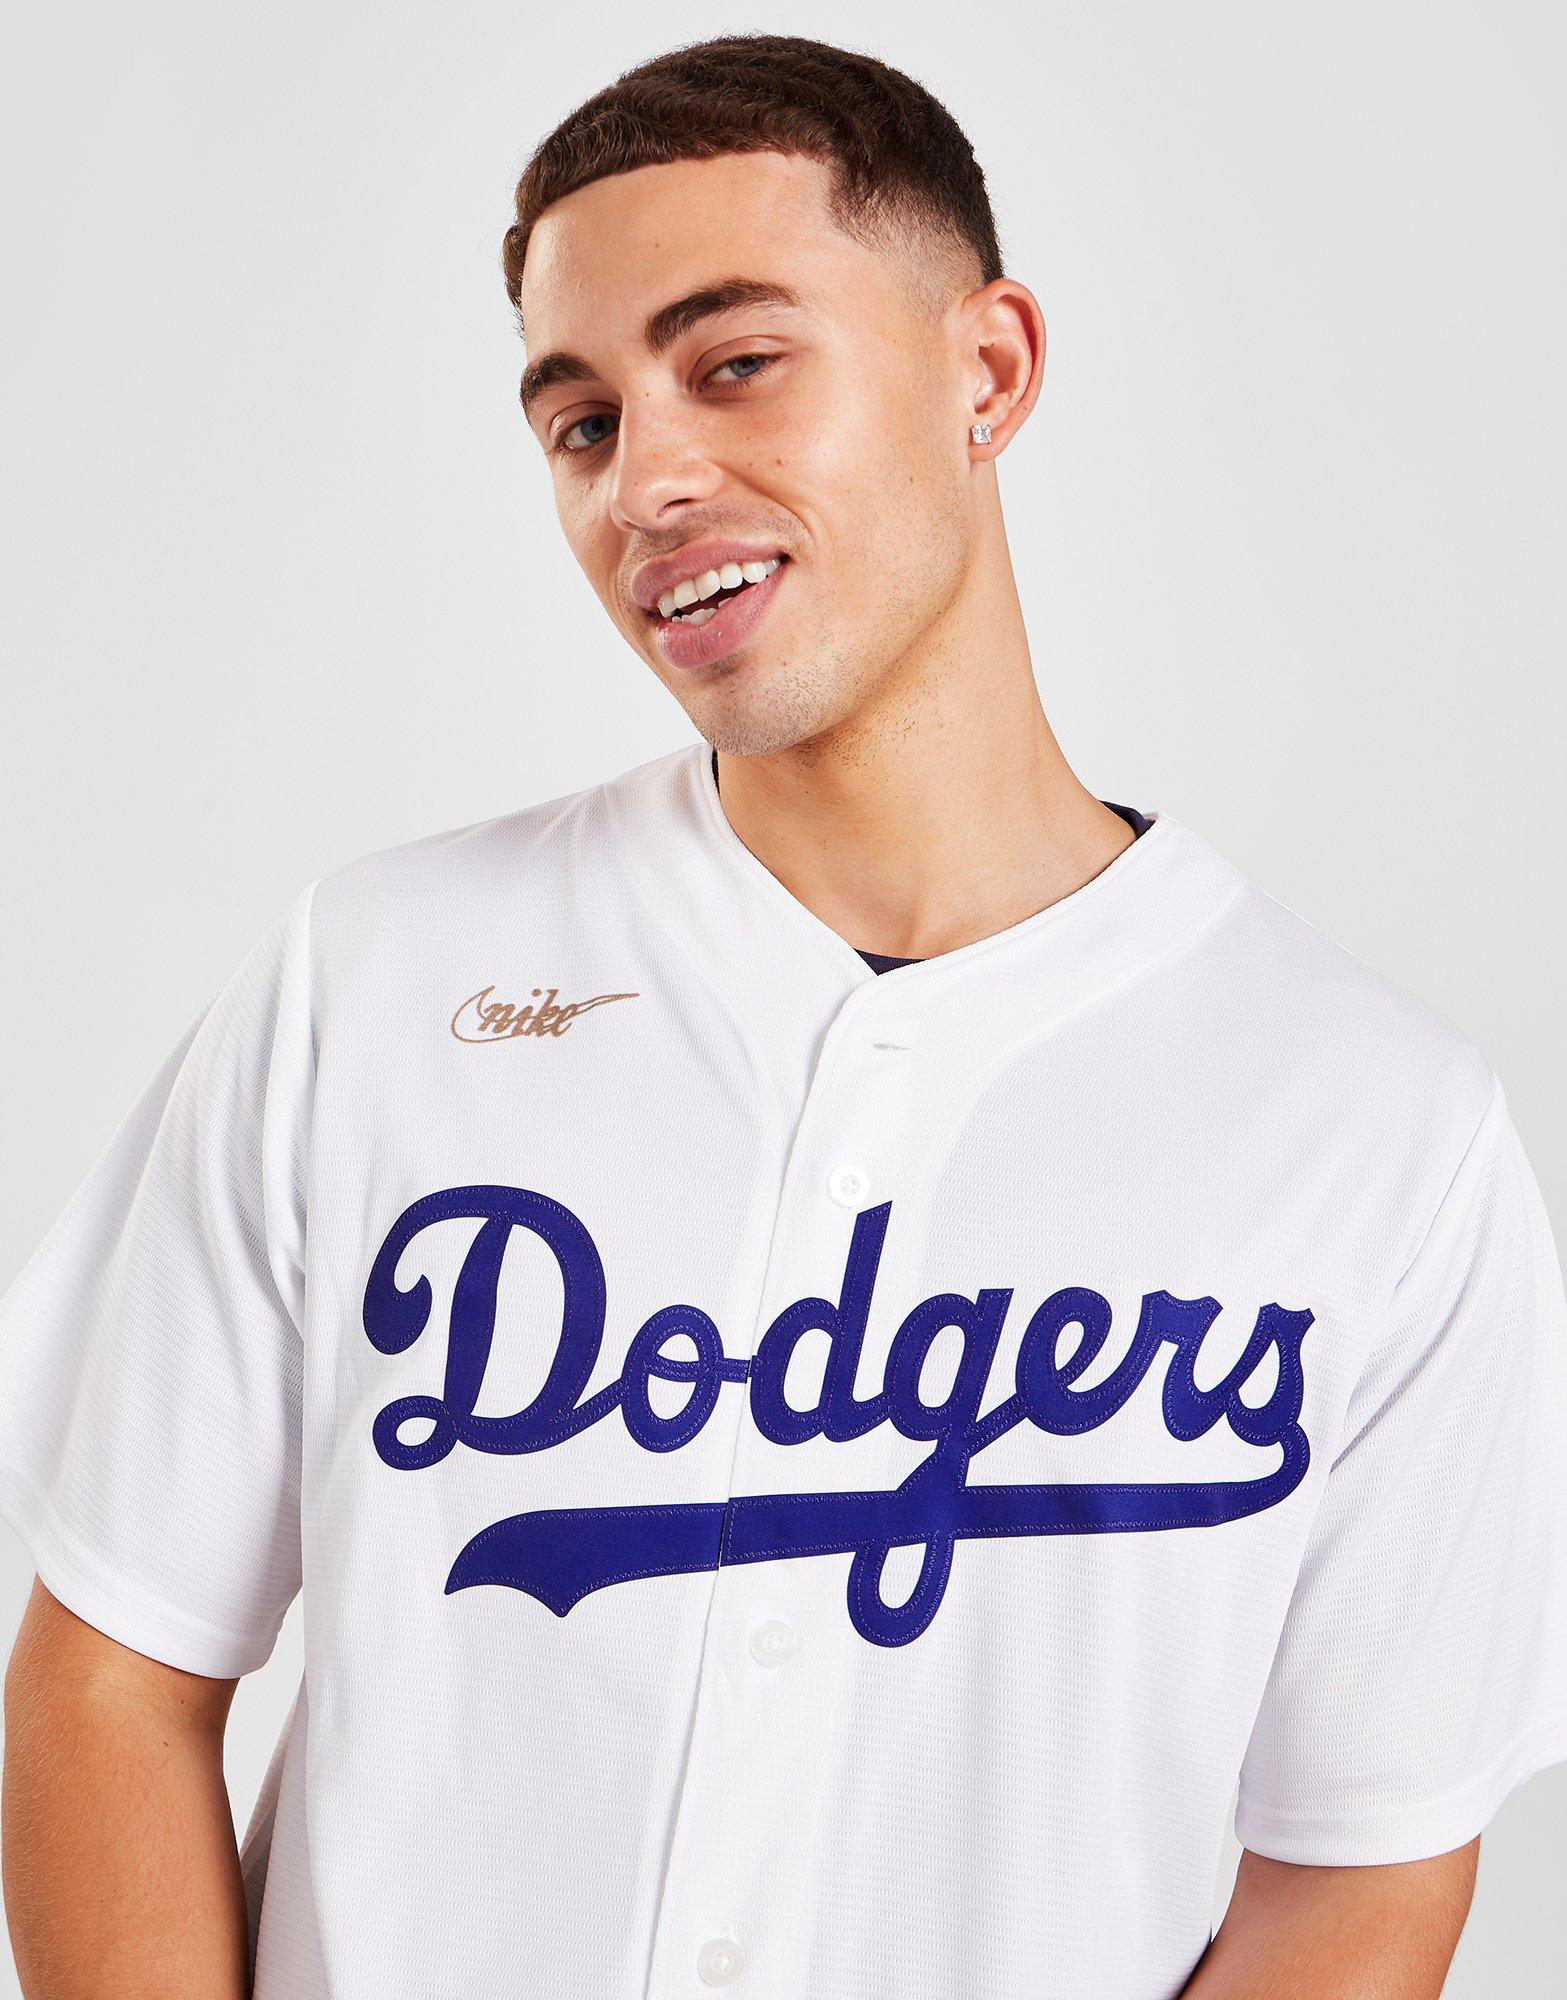 dodgers jersey white